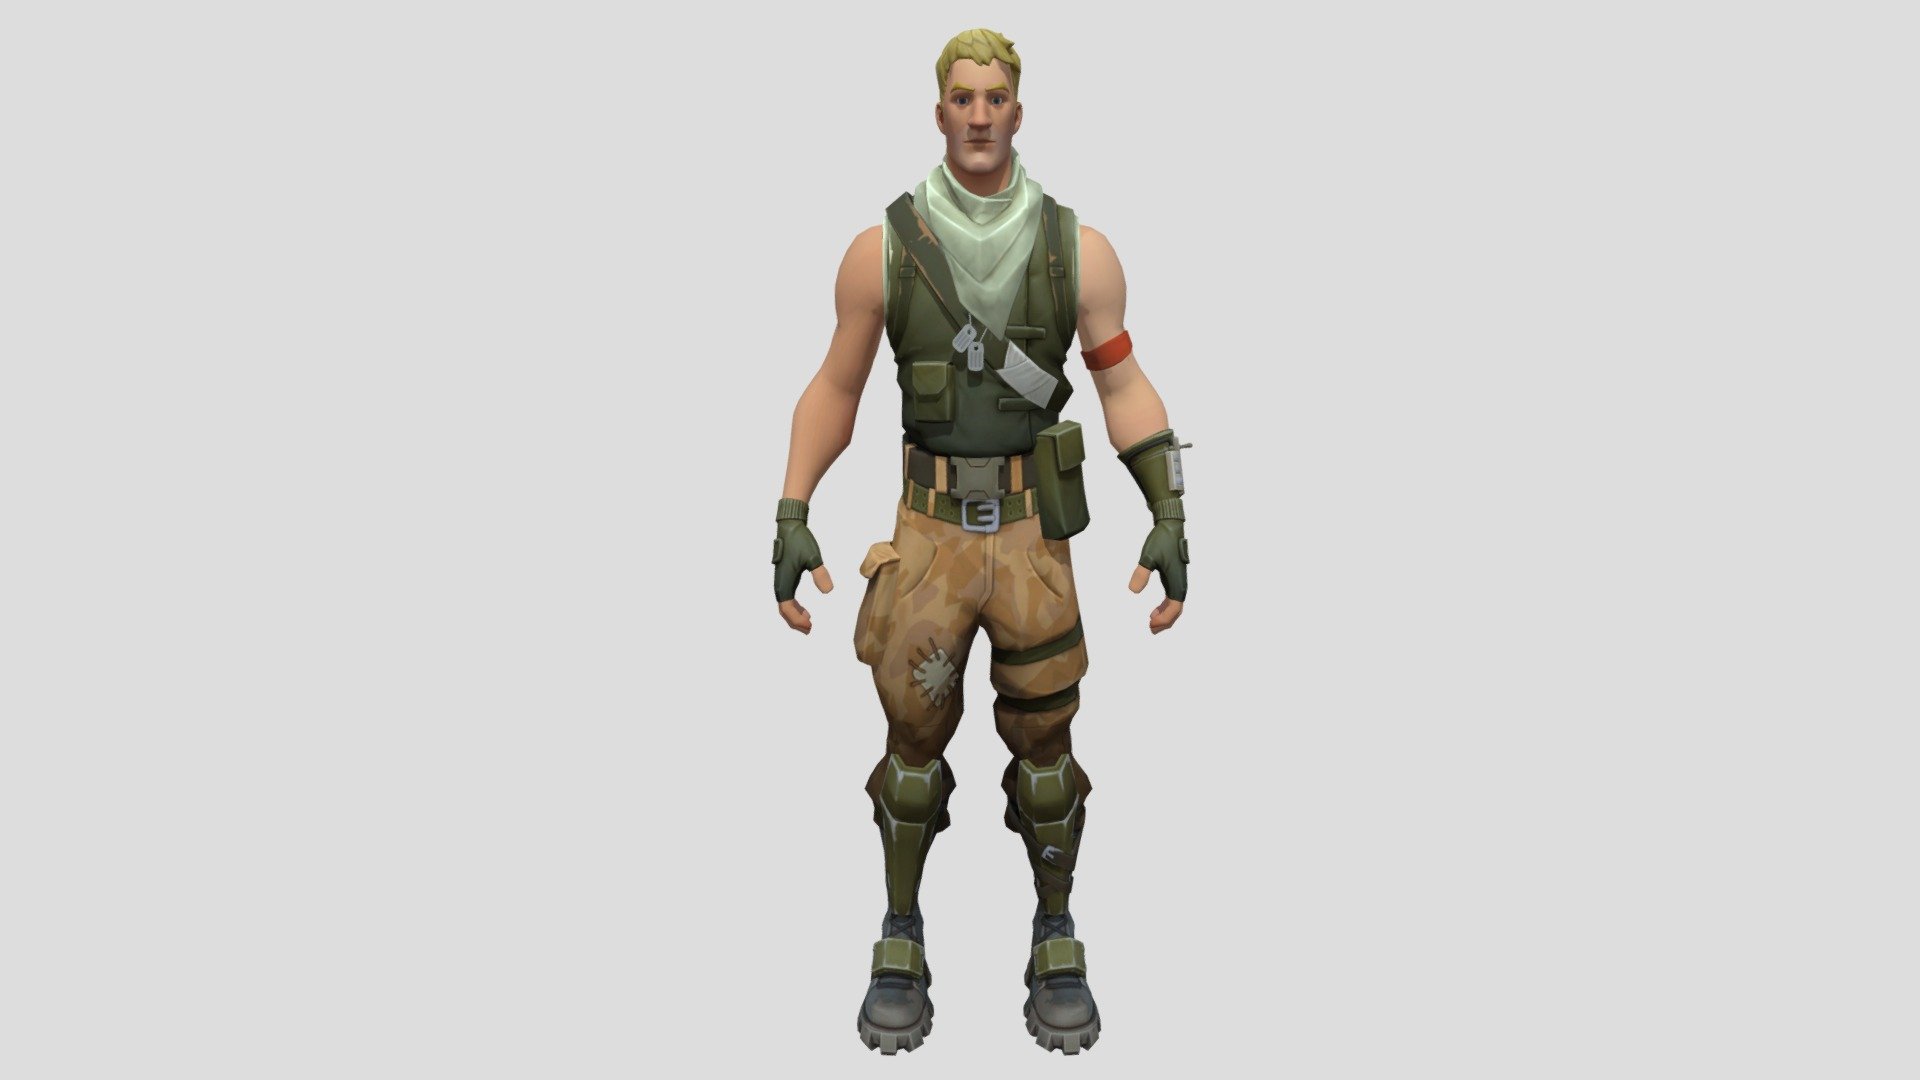 From the video game Fortnite, rigged in MAYA. 

It SHOULD be rigged, but I am getting a few errors when I try to export it. Let me know if it is not rigged for Maya 3d model